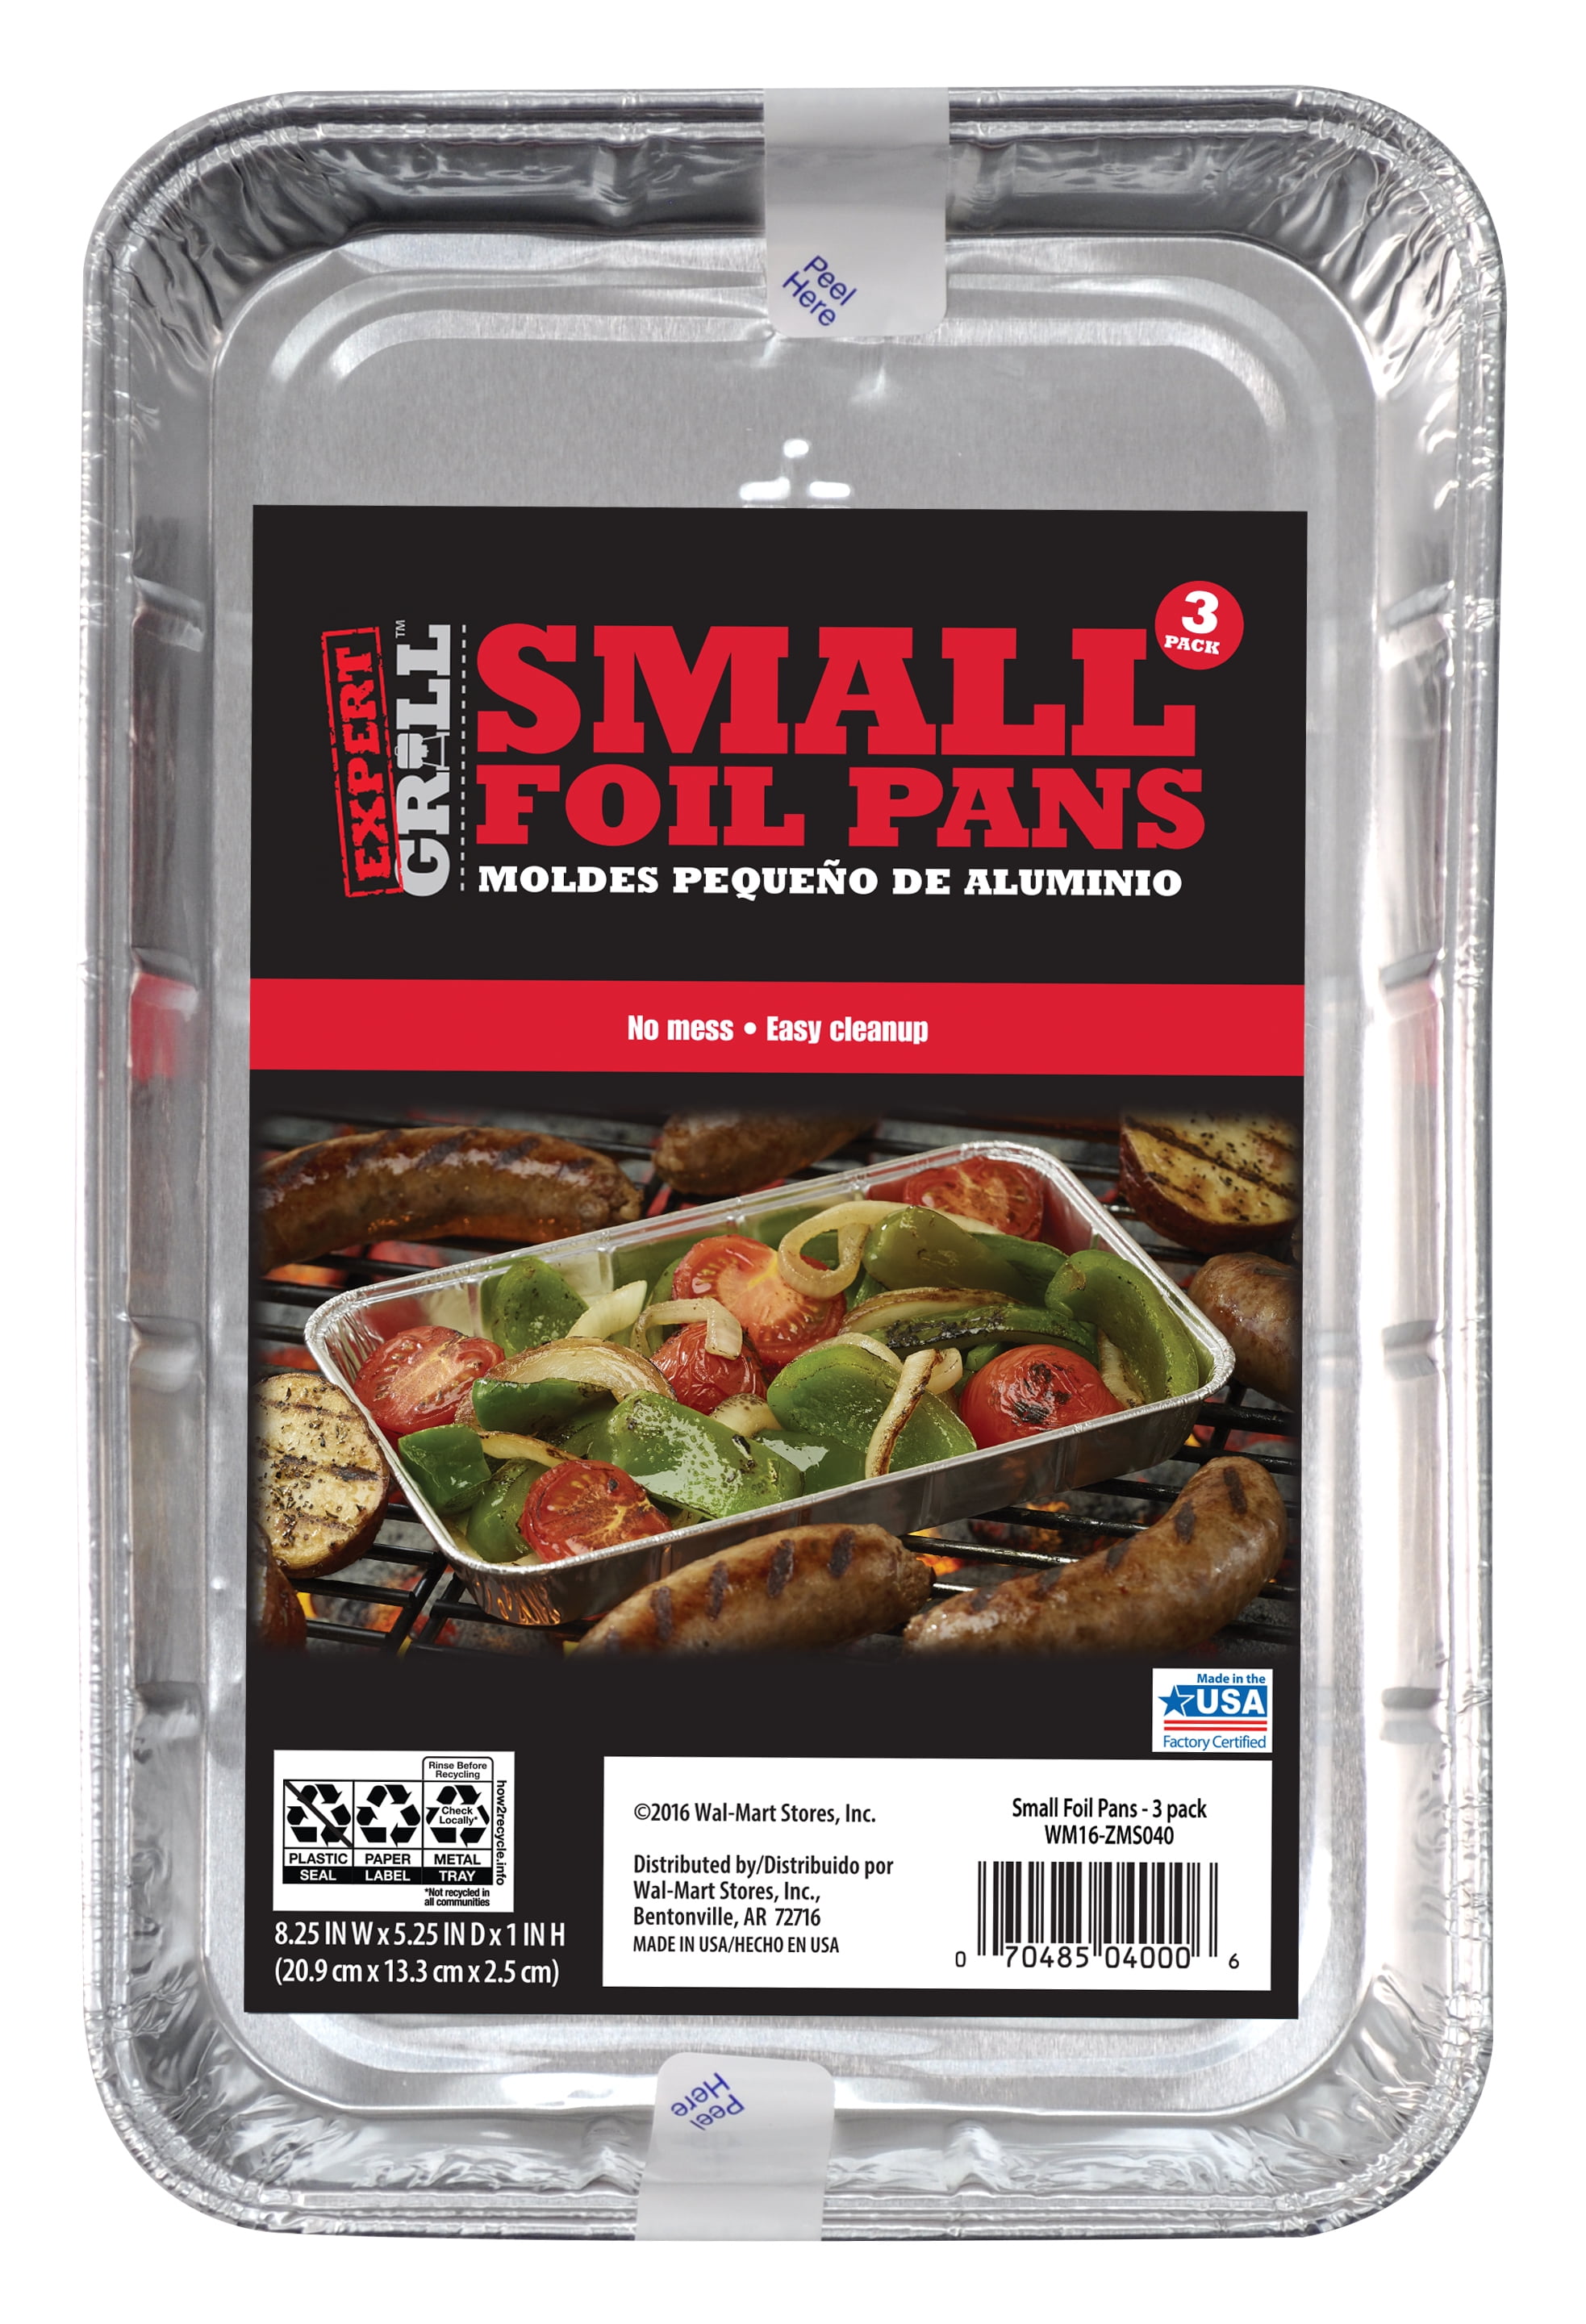 Promotion Convenient Italian Small Grill Pan  Buy Ferraboli Products on  Foxchef at Discounted Prices